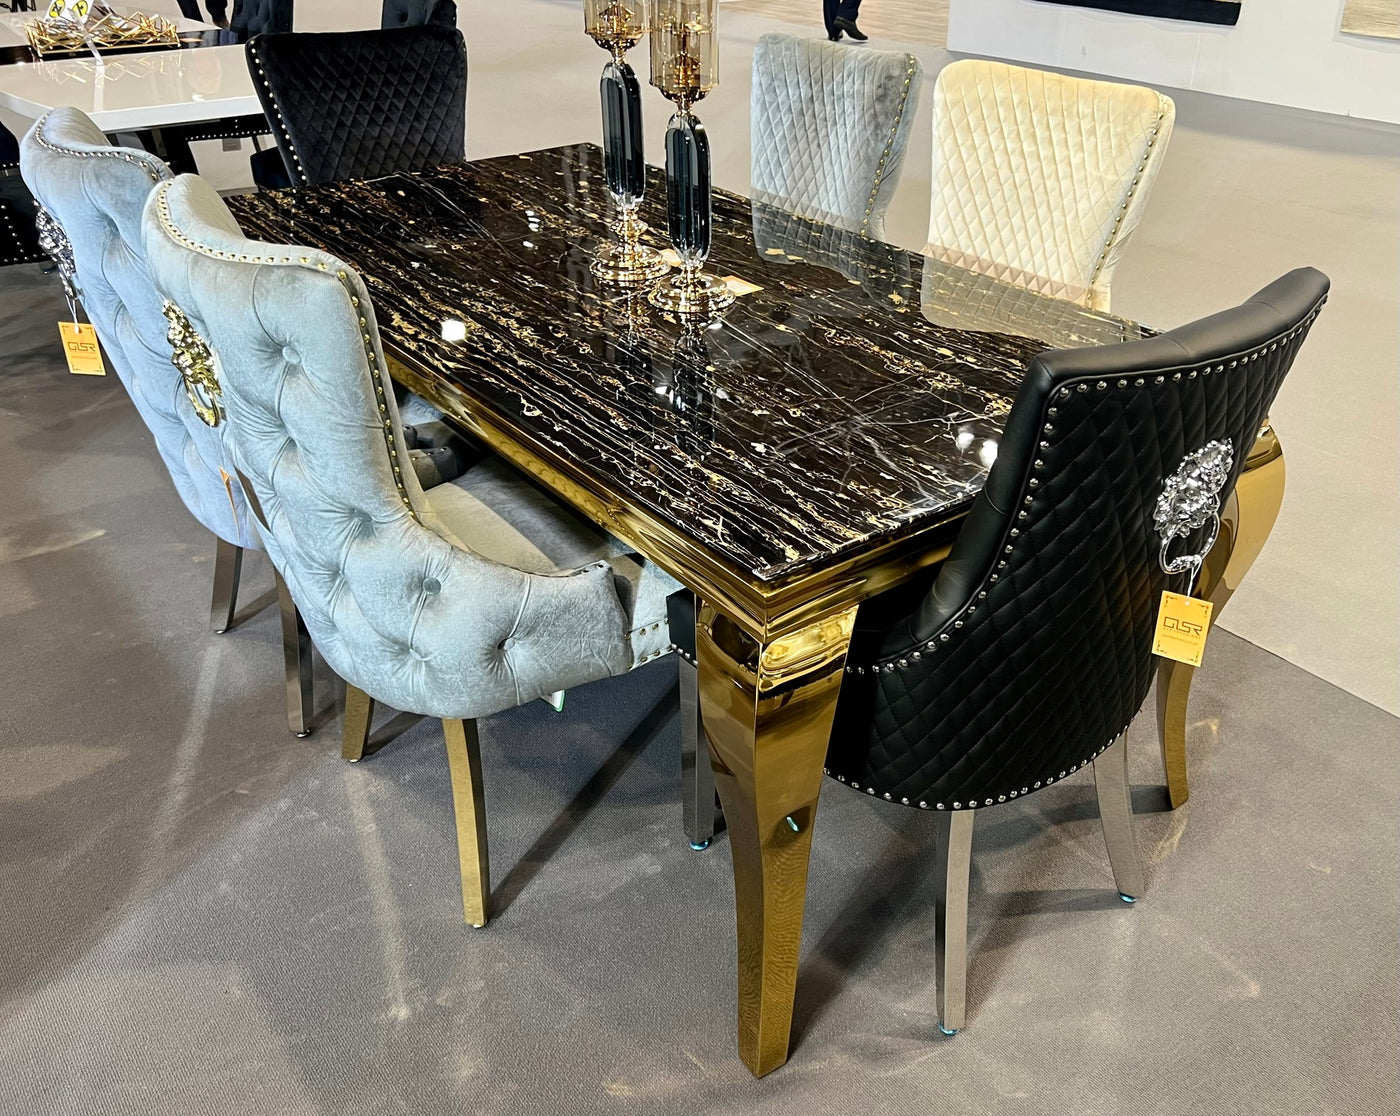 Louis Gold Marble Dining Table With Gold Lion Knocker Dining Chairs-Esme Furnishings